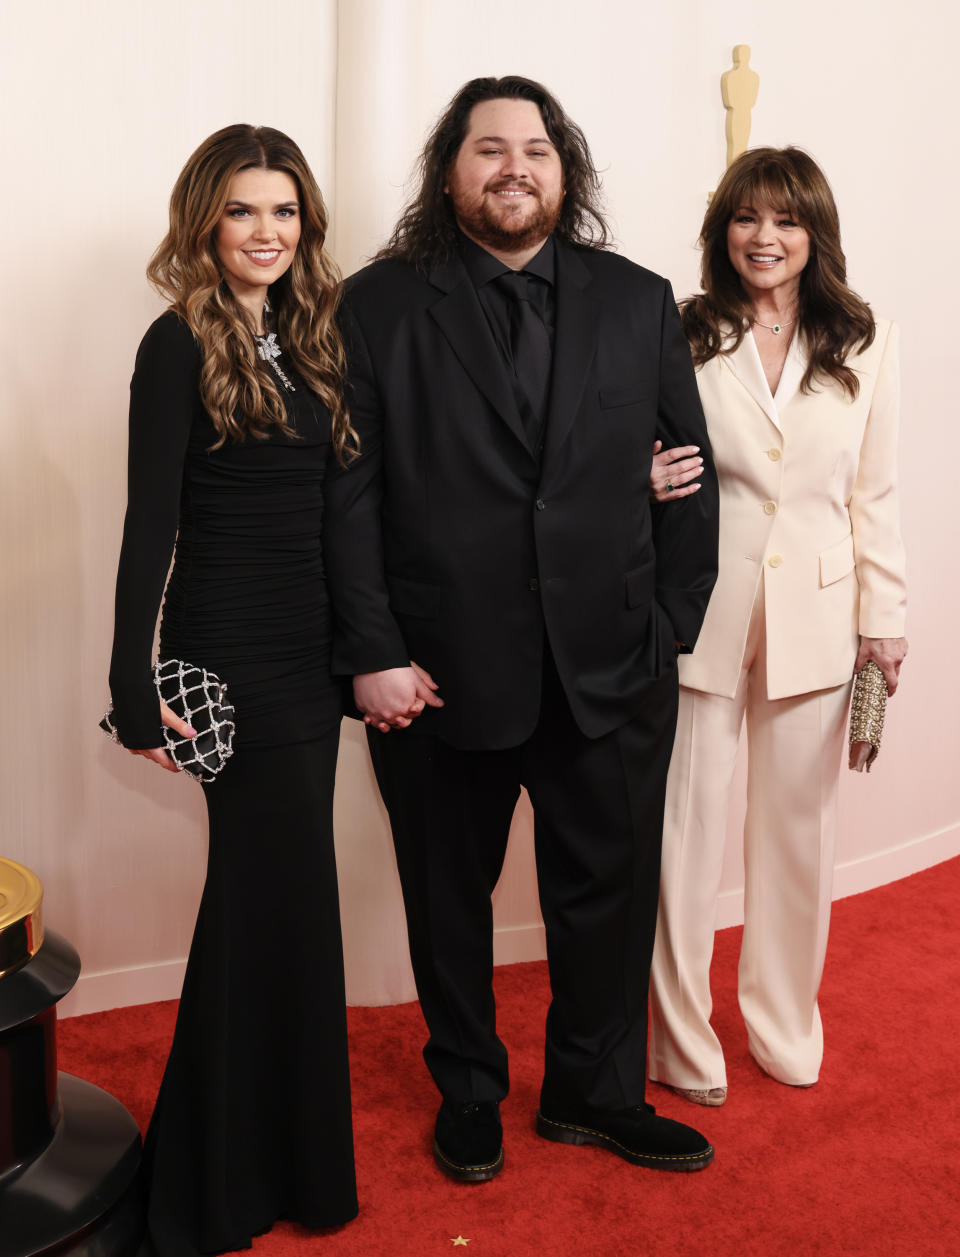 From left, Andraia Allsop, Wolfgang Van Halen and Valerie Bertinelli at the Academy Awards on March 10.